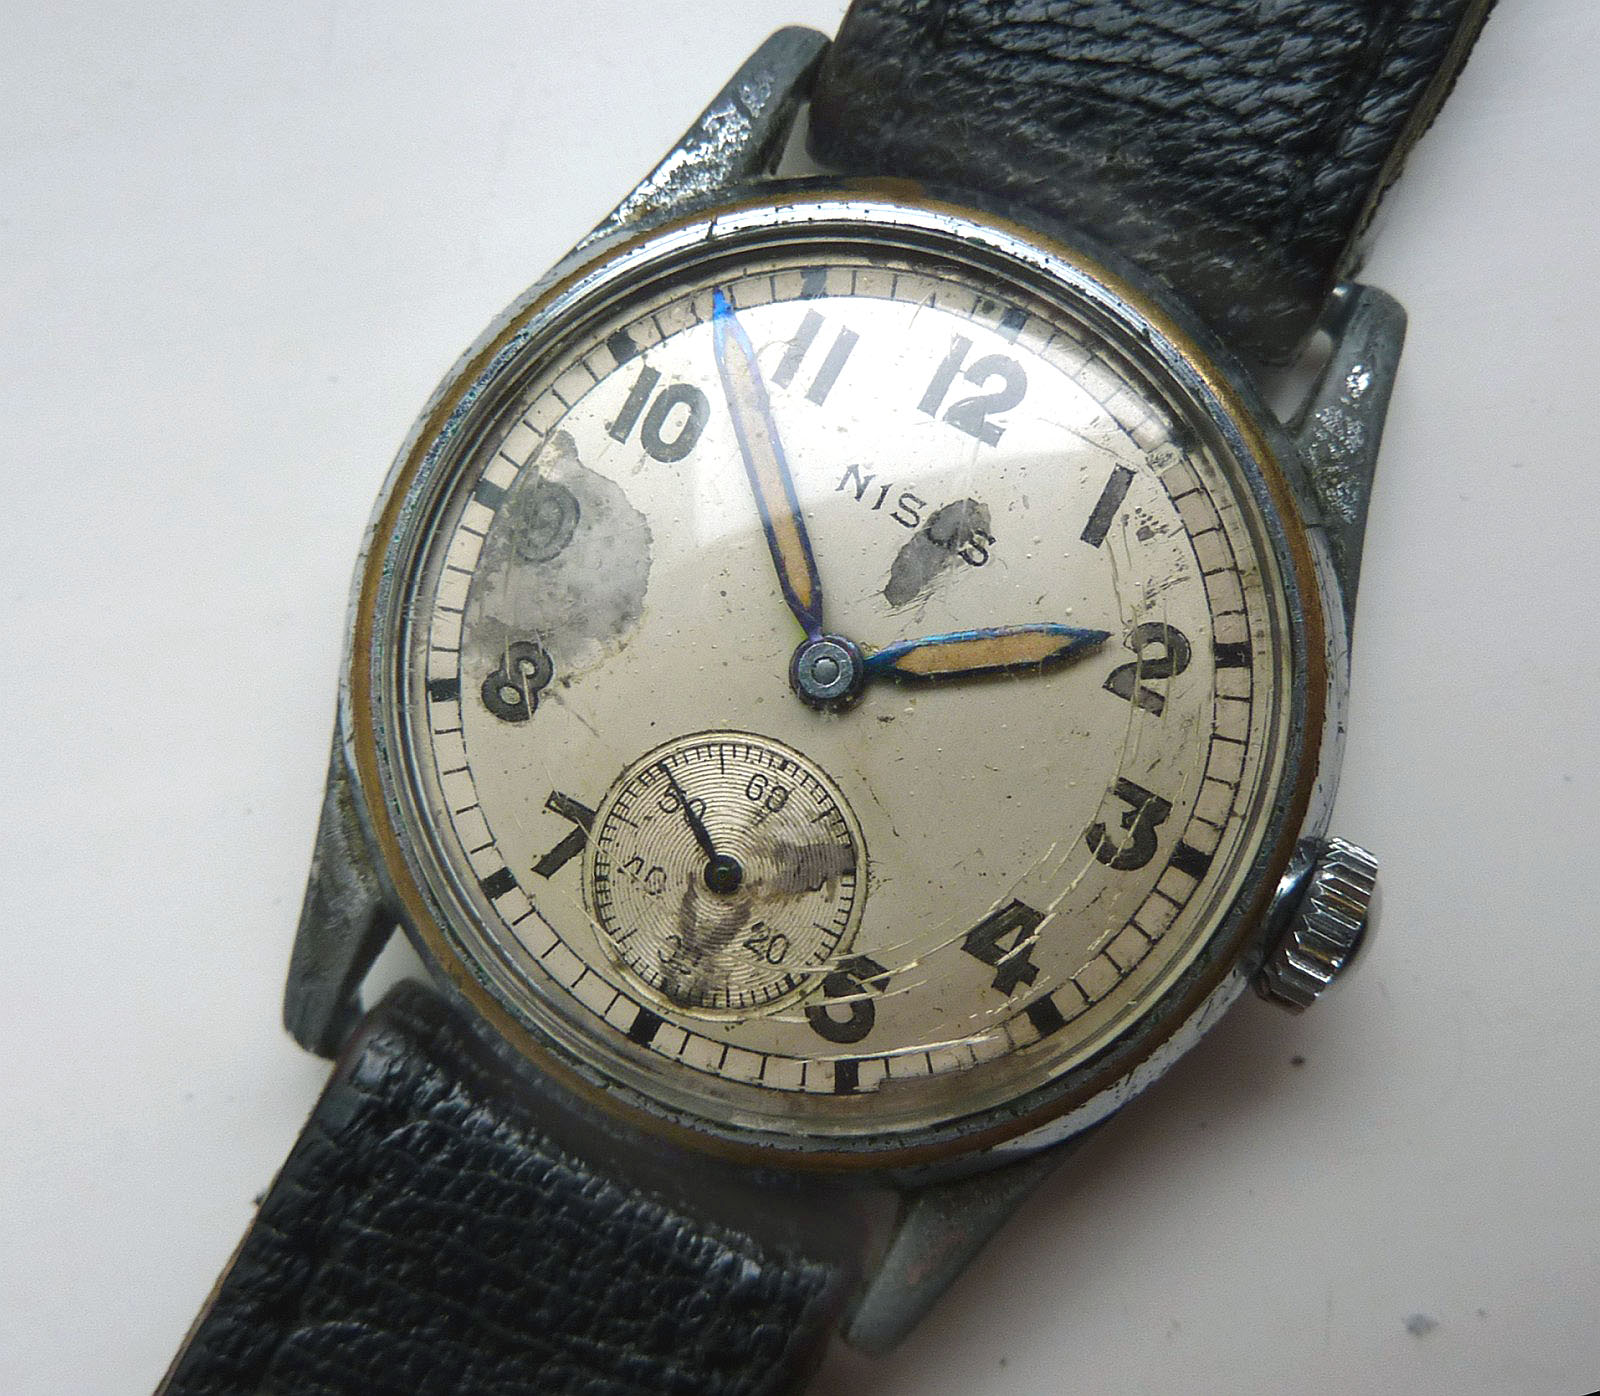 Details about NISUS British Military Watch WWII cal.170 C170 Vintage ...